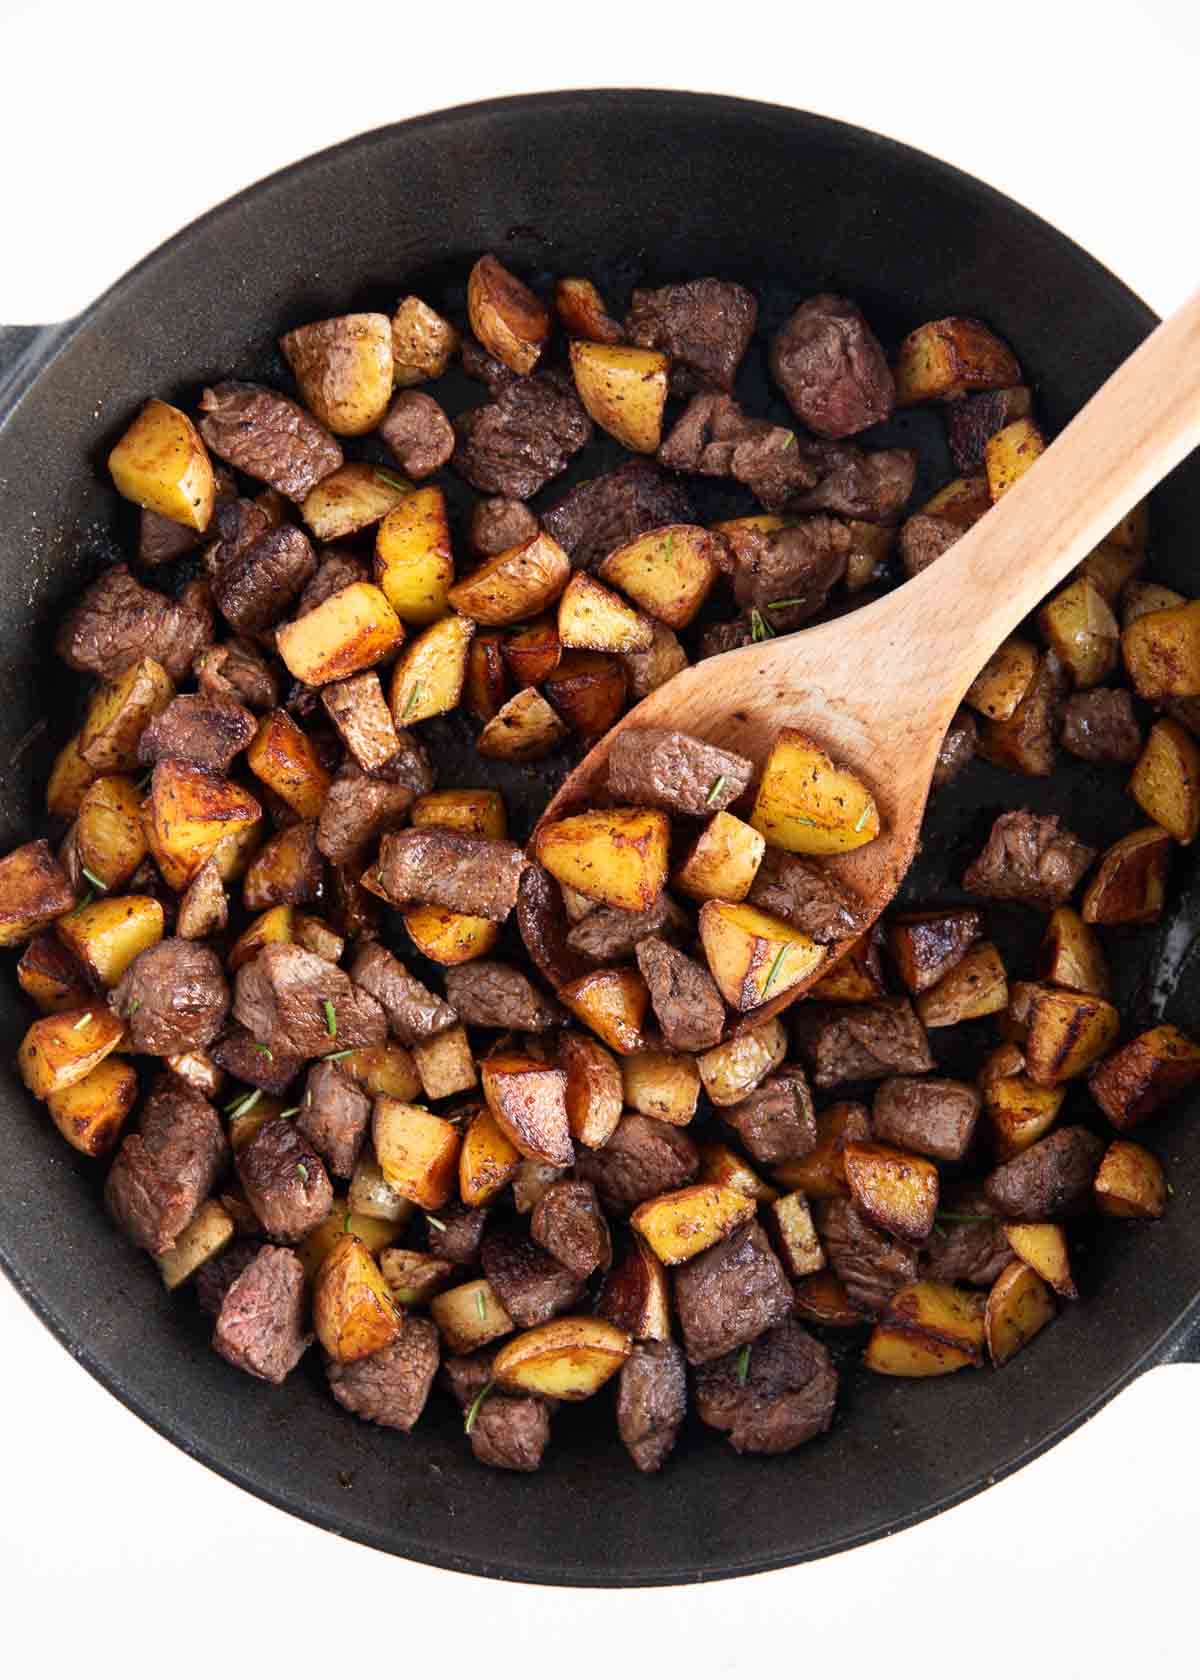 Steak and potatoes in a skillet.